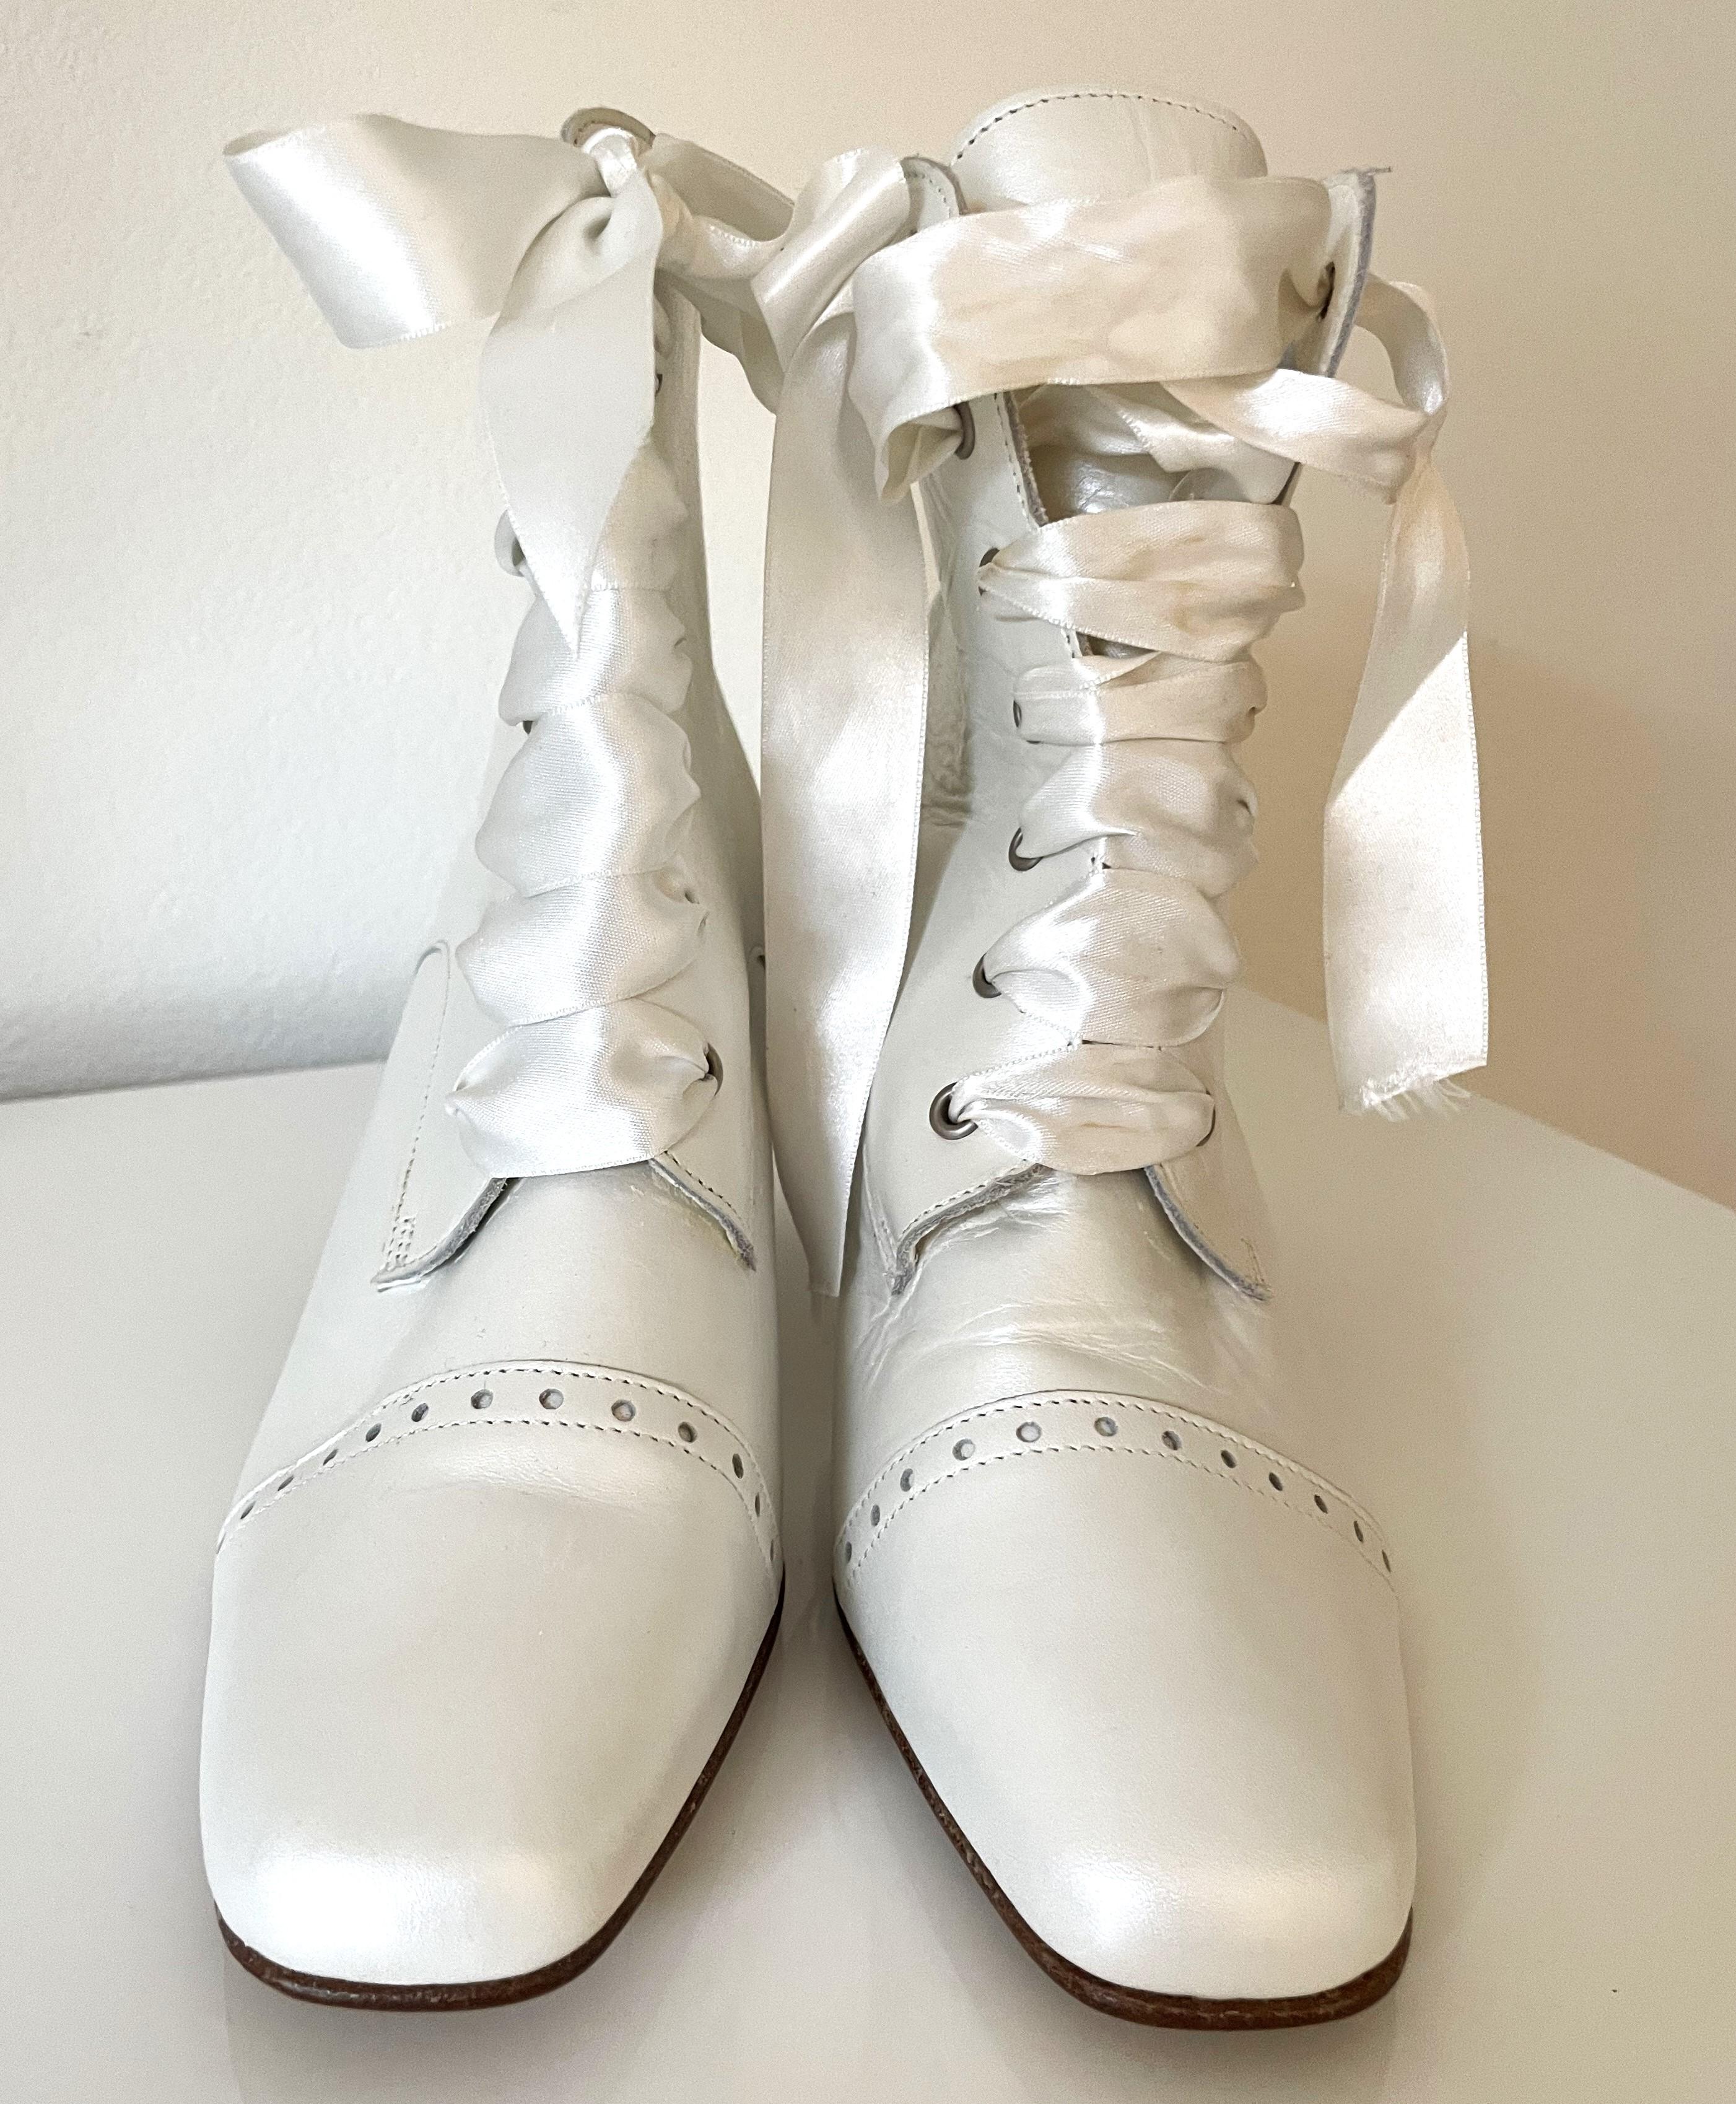 Courman Paris Bridal Shoes Boots White Leather 90s In Fair Condition For Sale In 'S-HERTOGENBOSCH, NL